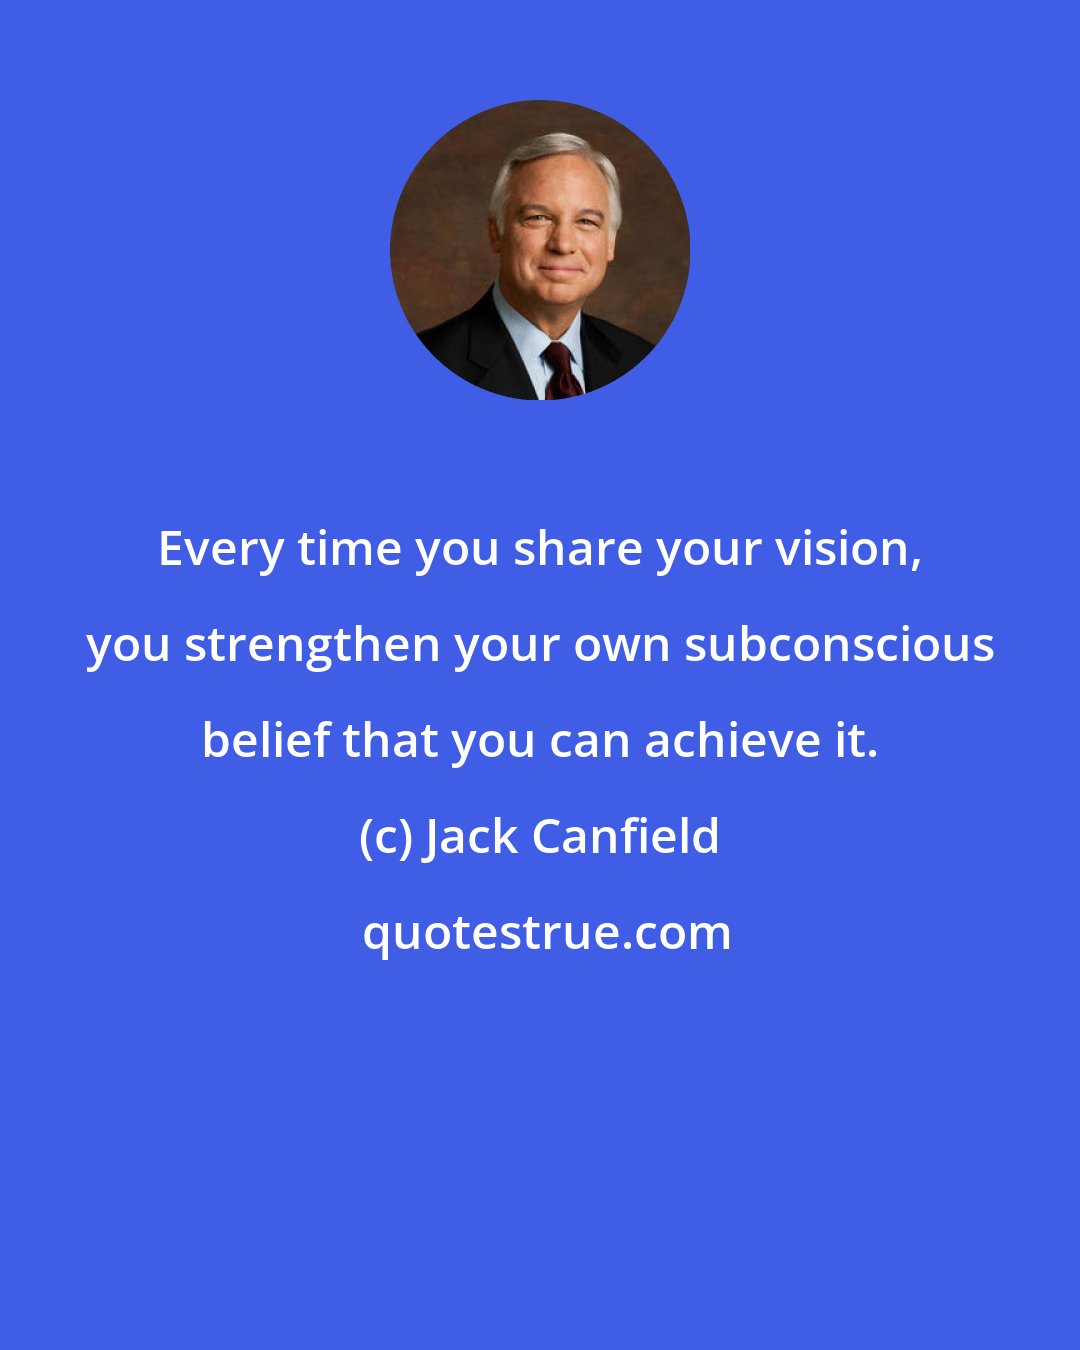 Jack Canfield: Every time you share your vision, you strengthen your own subconscious belief that you can achieve it.